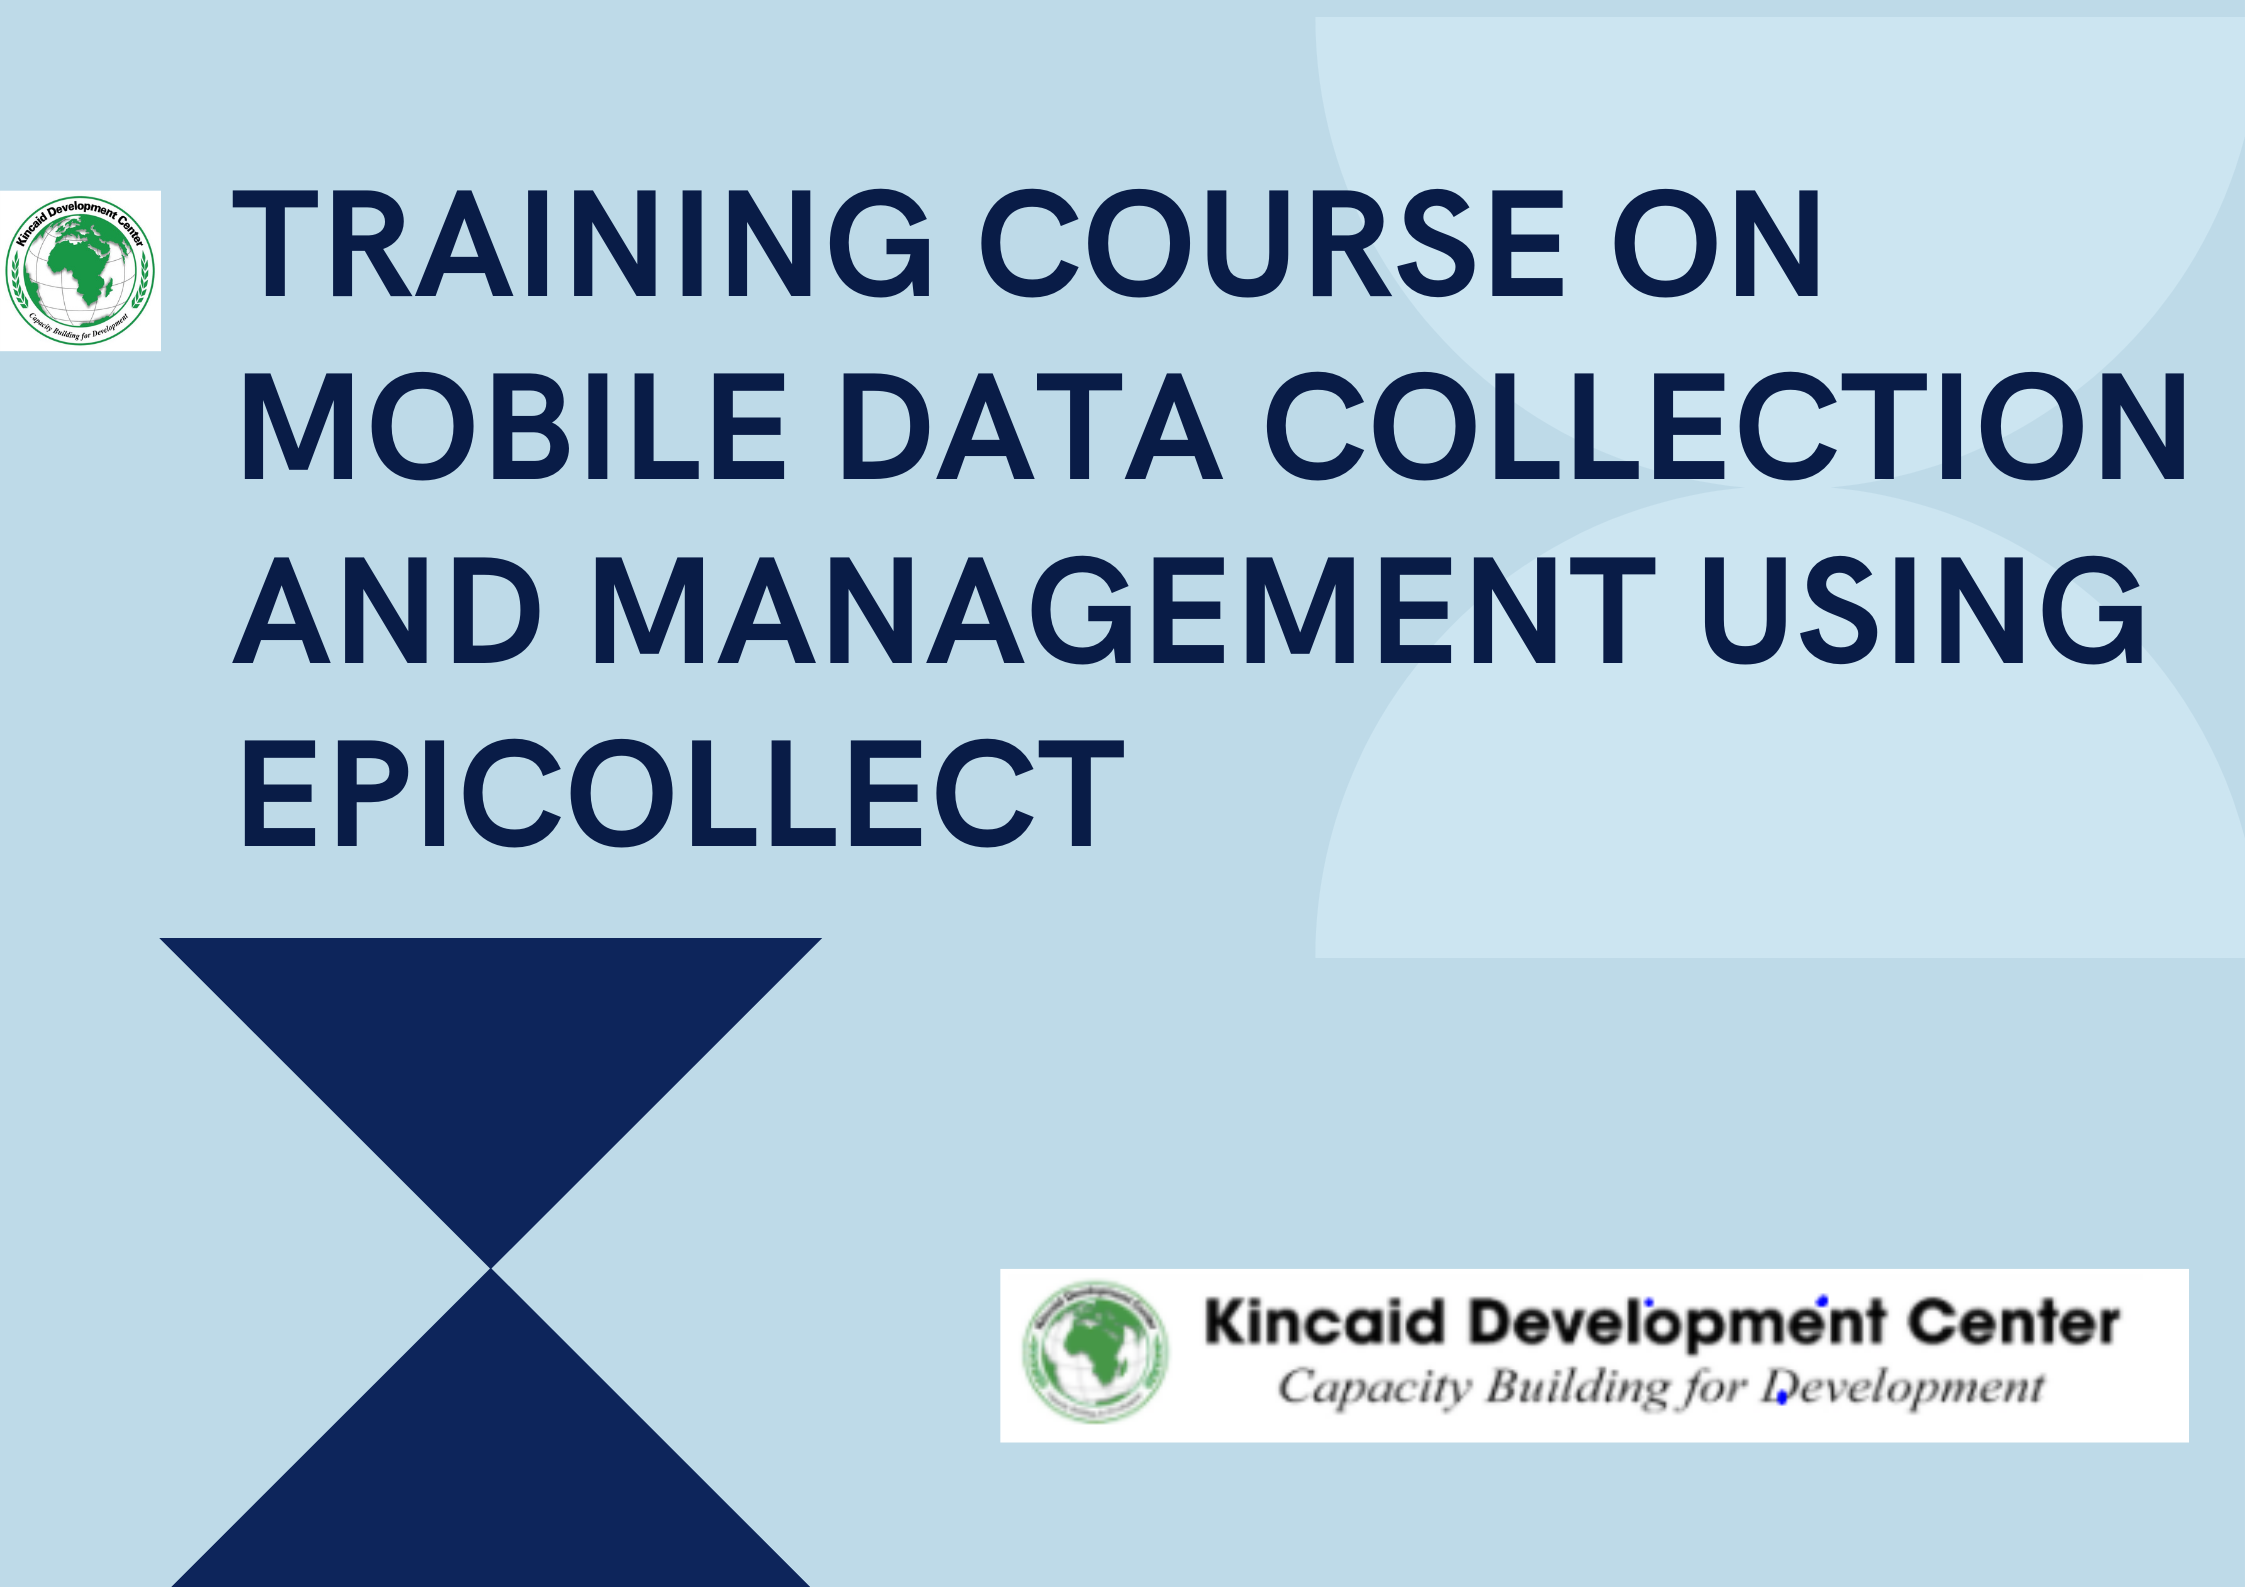 TRAINING COURSE ON MOBILE DATA COLLECTION AND MANAGEMENT USING EPICOLLECT, Nairobi, Kenya